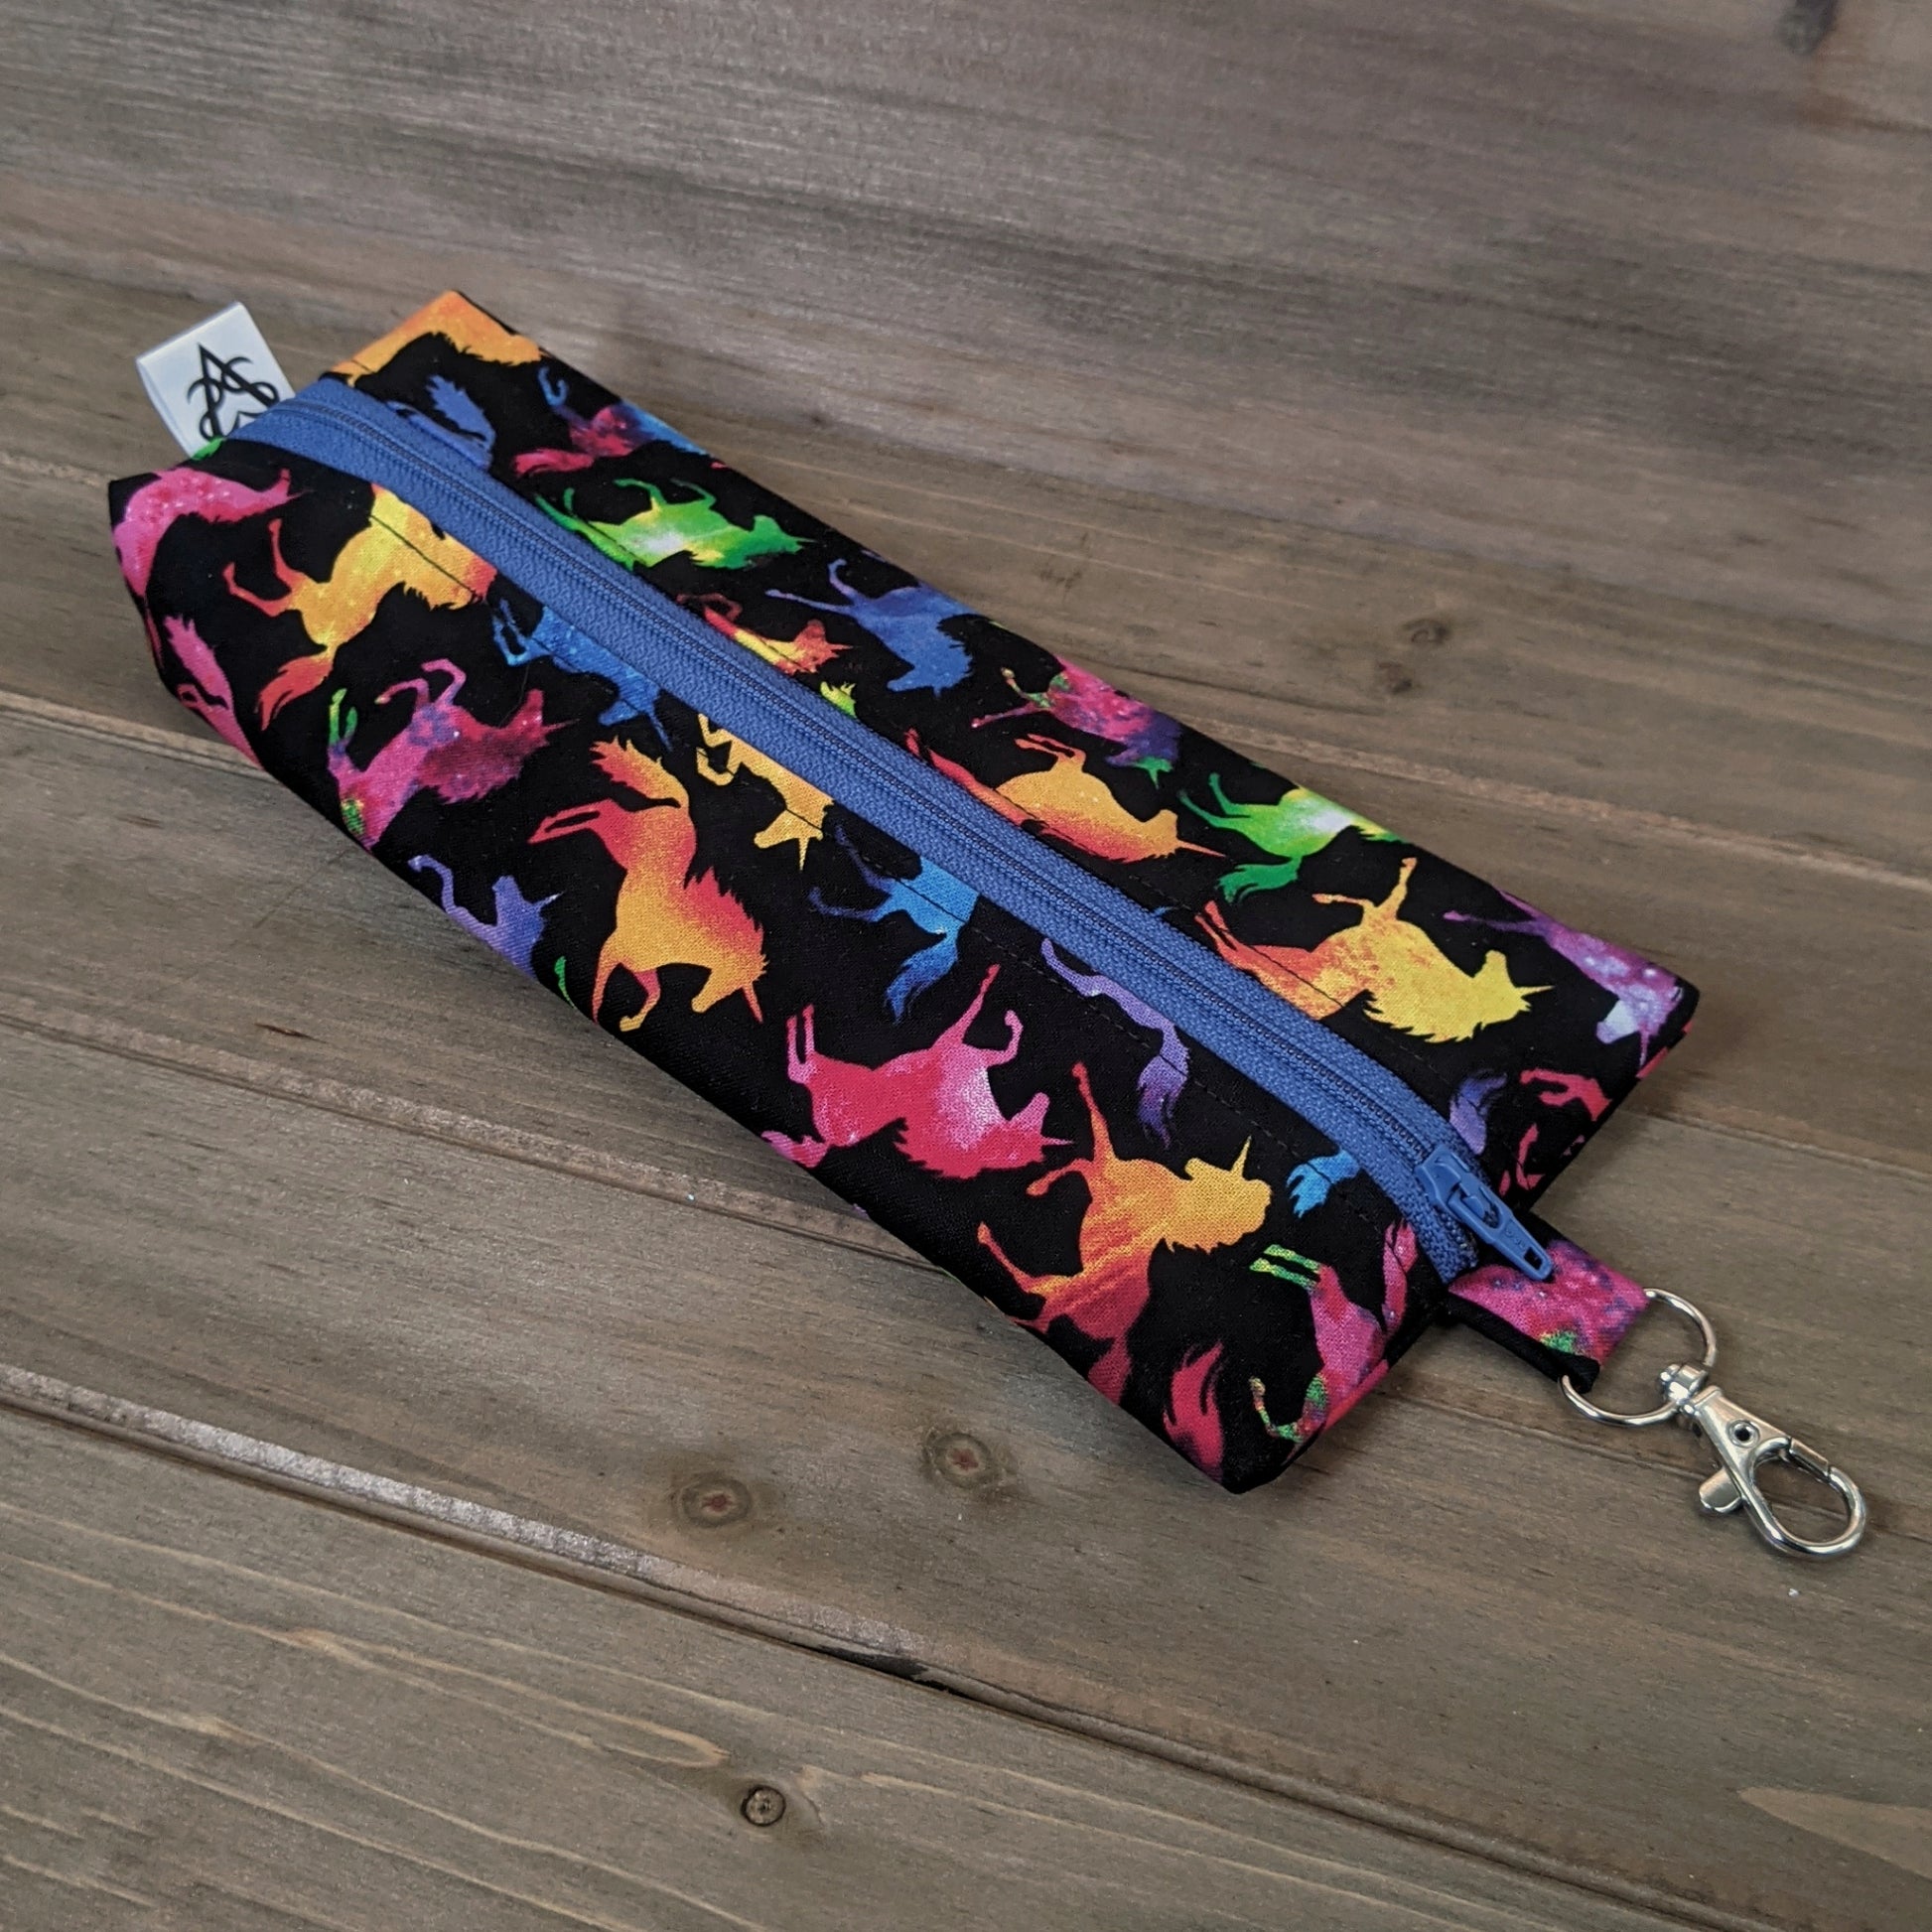 A zippered bag in the shape of a wedge with a tag at the bottom and a lobster clasp at the narrow end, made with rainbow galaxy unicorn fabric.